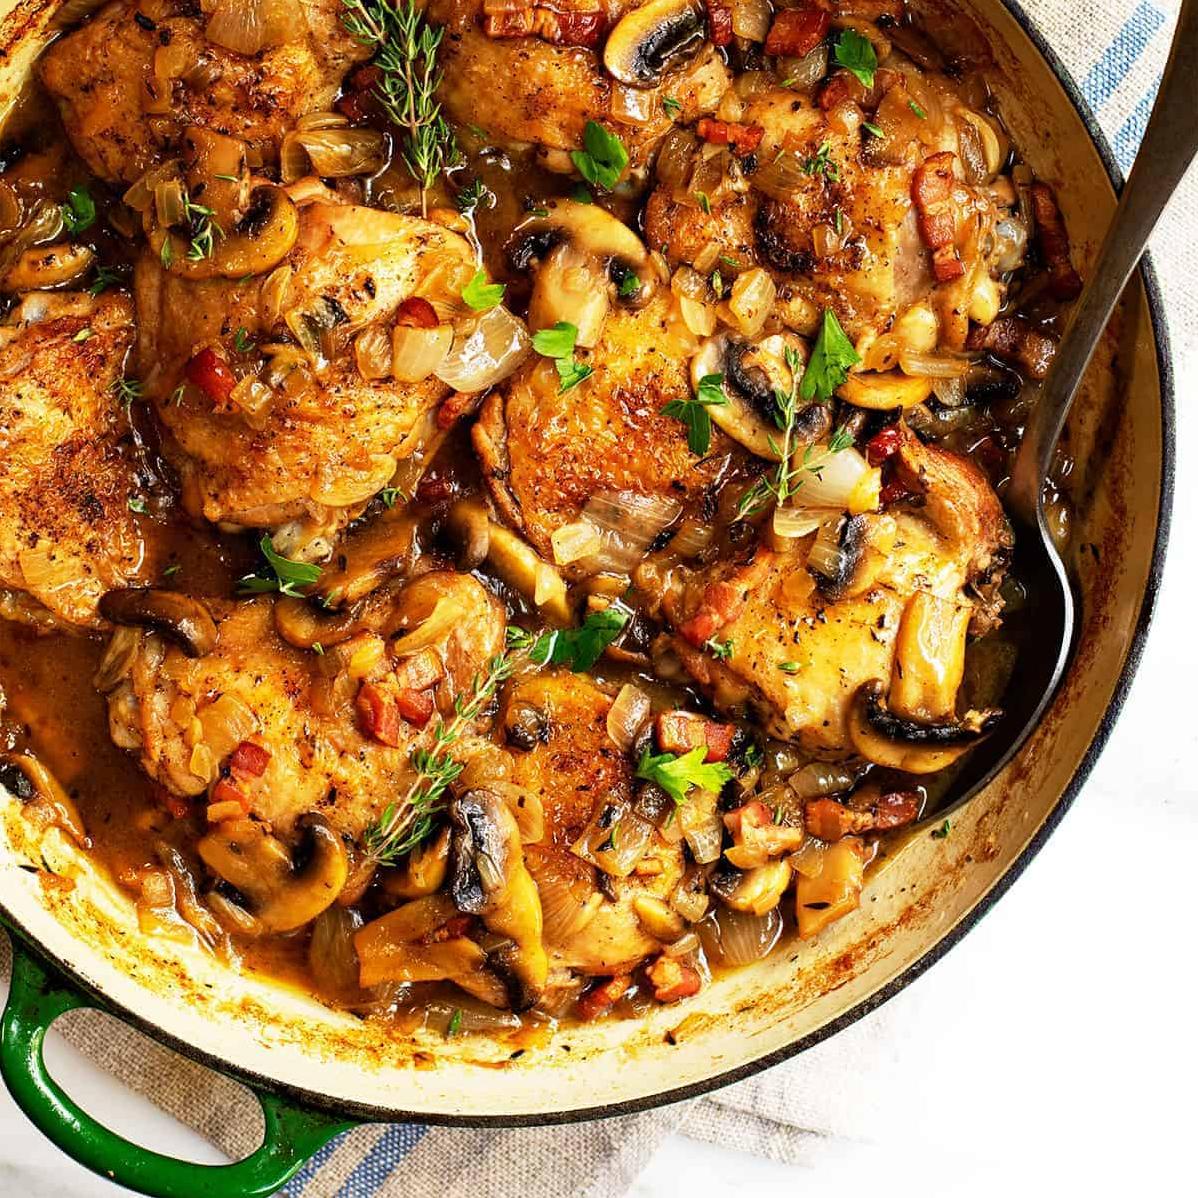  A splash of white wine can transform an ordinary chicken dish into something extraordinary.